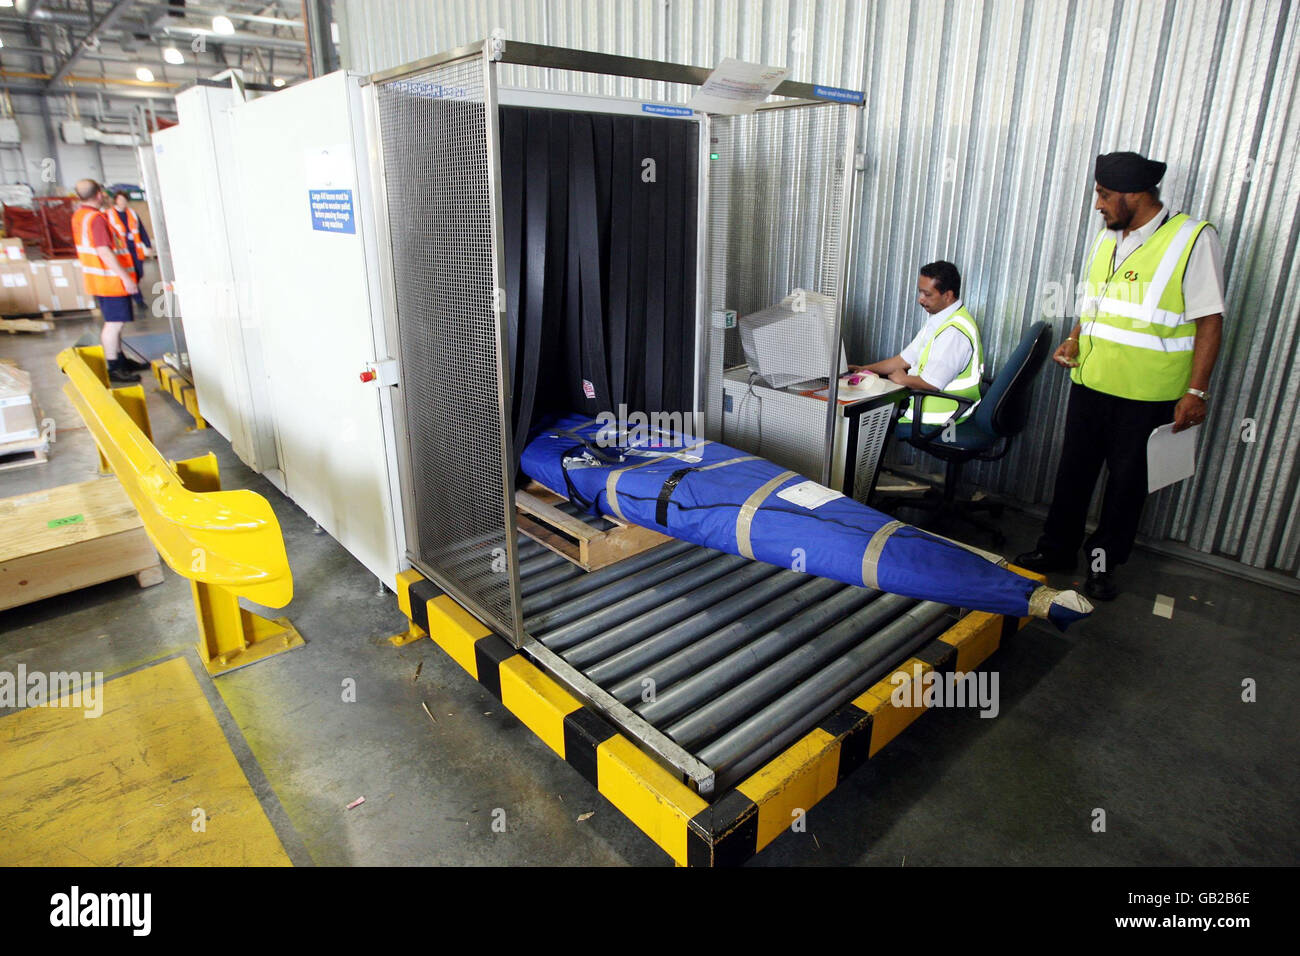 One of the Great British Olympic team's canoes is x-rayed before being loaded into crates at British Airways' World Cargo centre at Heathrow Airport. Stock Photo